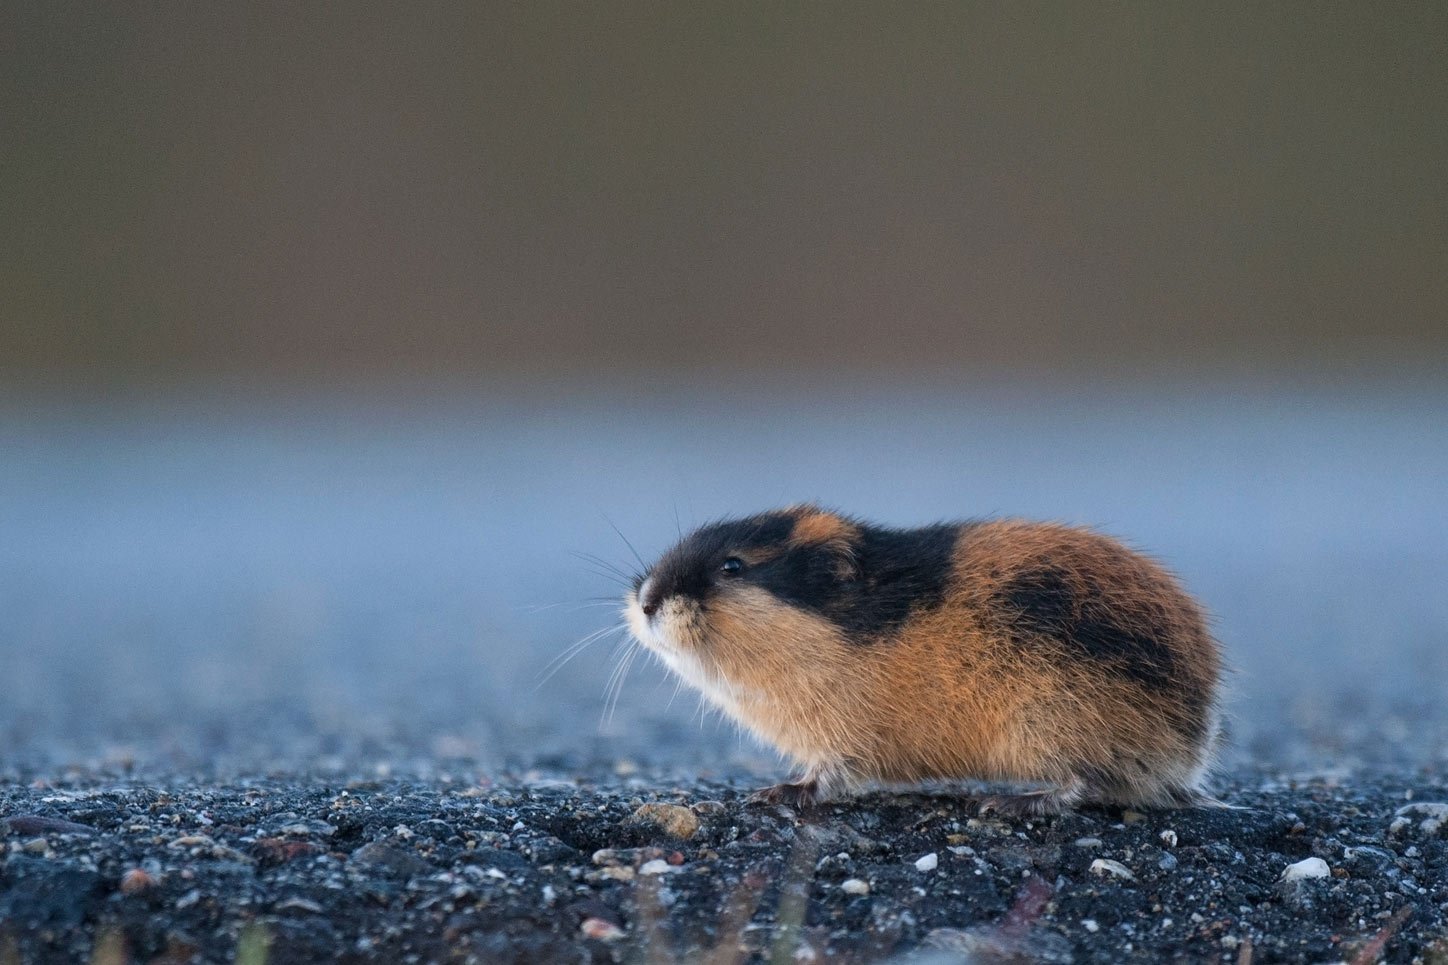 Lemming - The Little Giant Of The North 